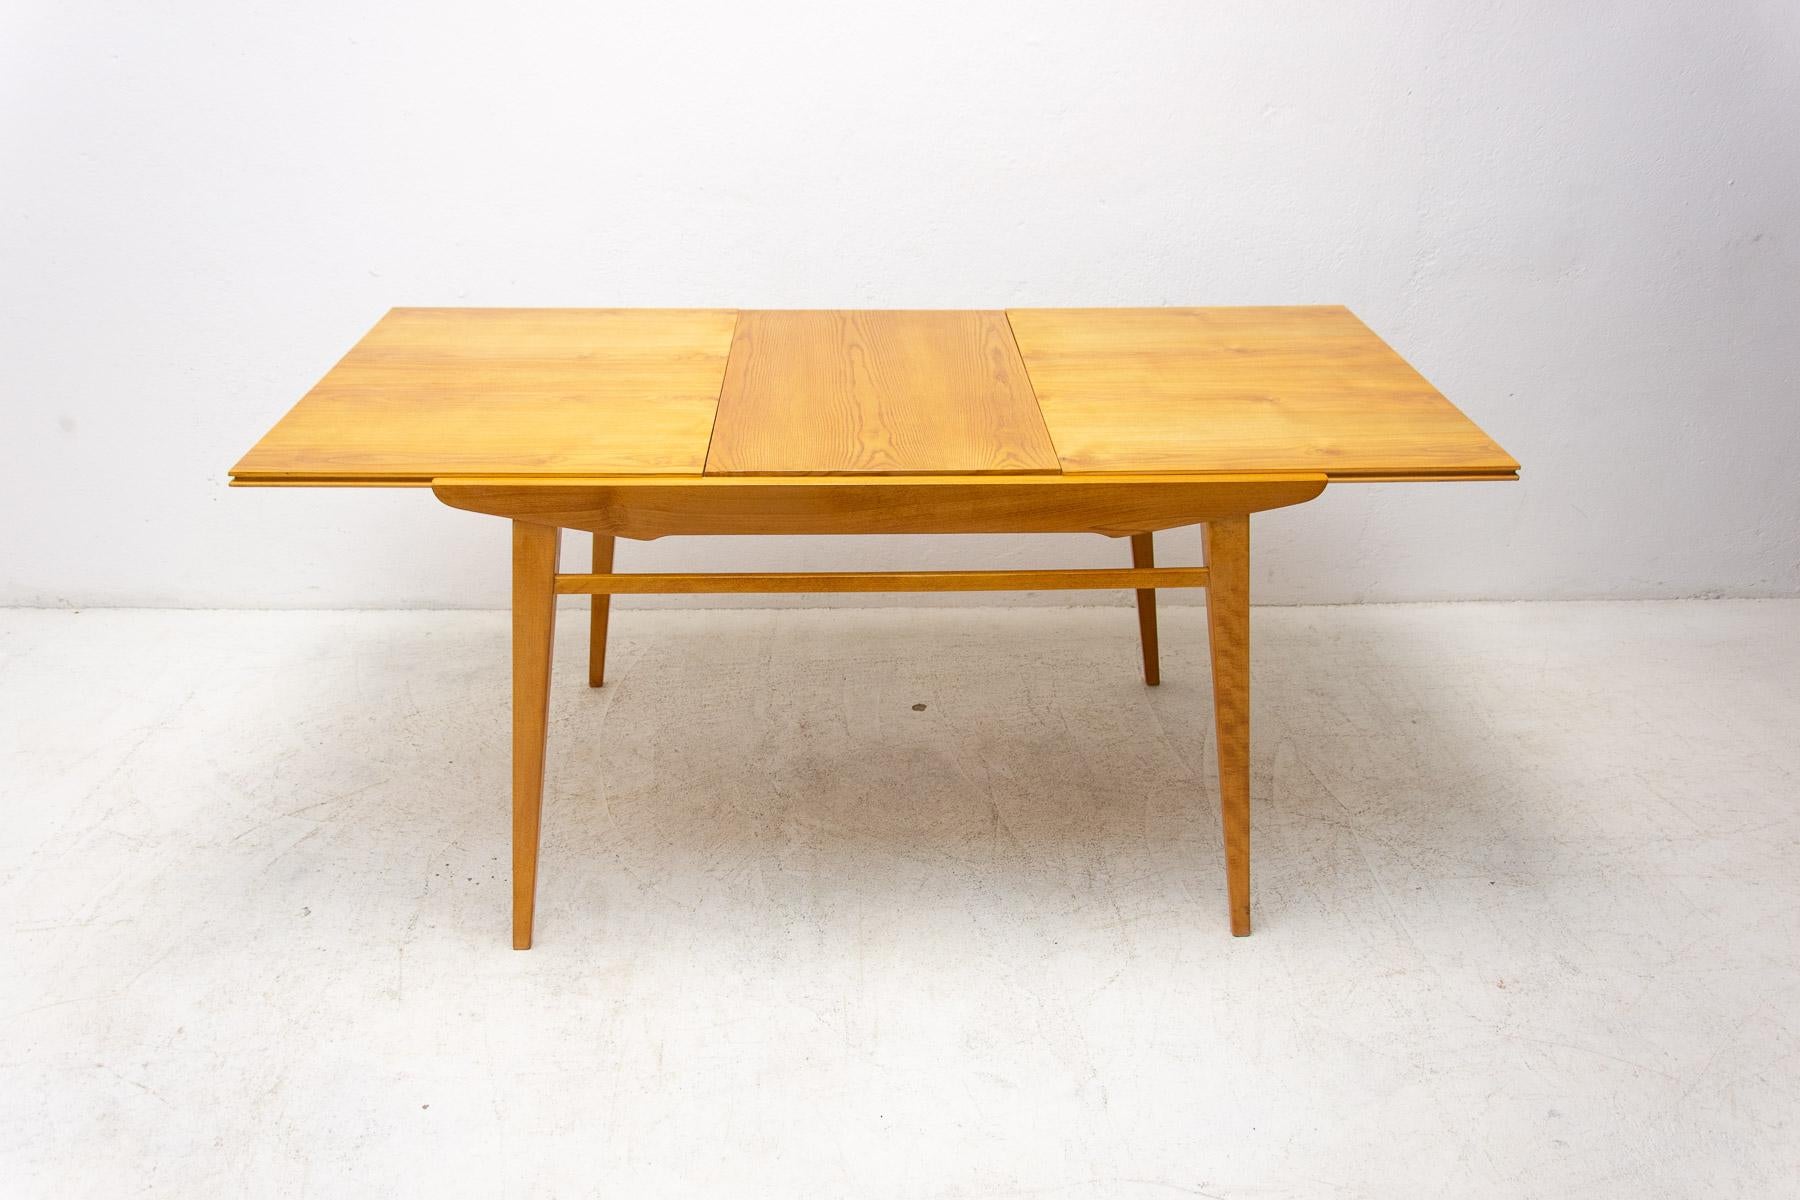 Midcentury Folding Dining Table by Bohumil Landsman for Jitona, 1970s For Sale 6